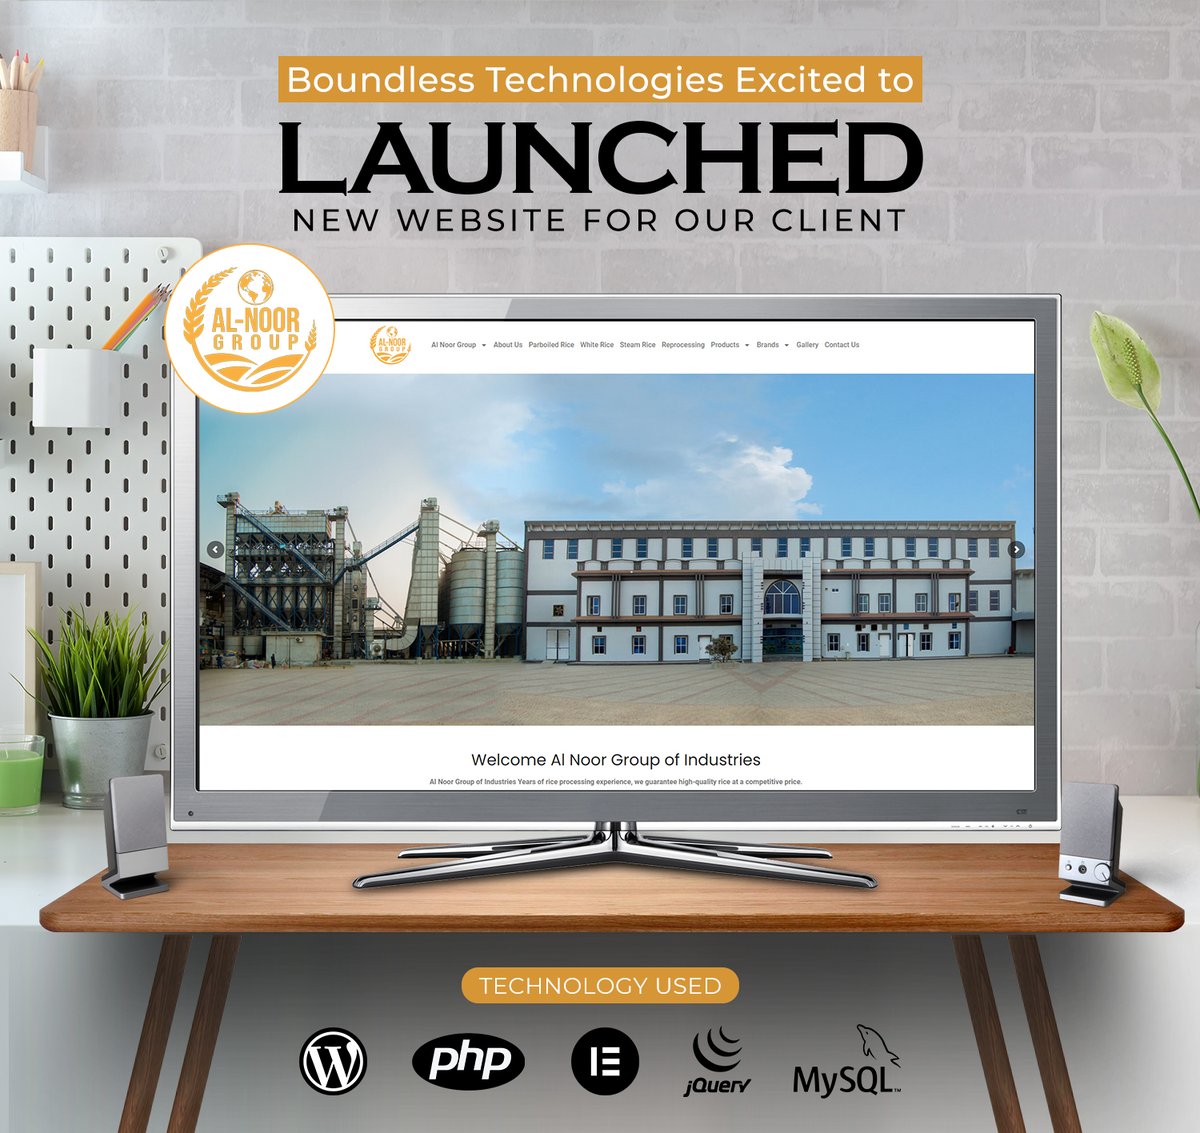 Boundless Technologies is proud to announce the launch of a new website we've built for our esteemed client with the latest technology | alnoorrice.com 📞 Contact us now: wa.me/923453133668 #BoundlessTechnologies #websitelaunch #AlNoorRice #websitedesignagency